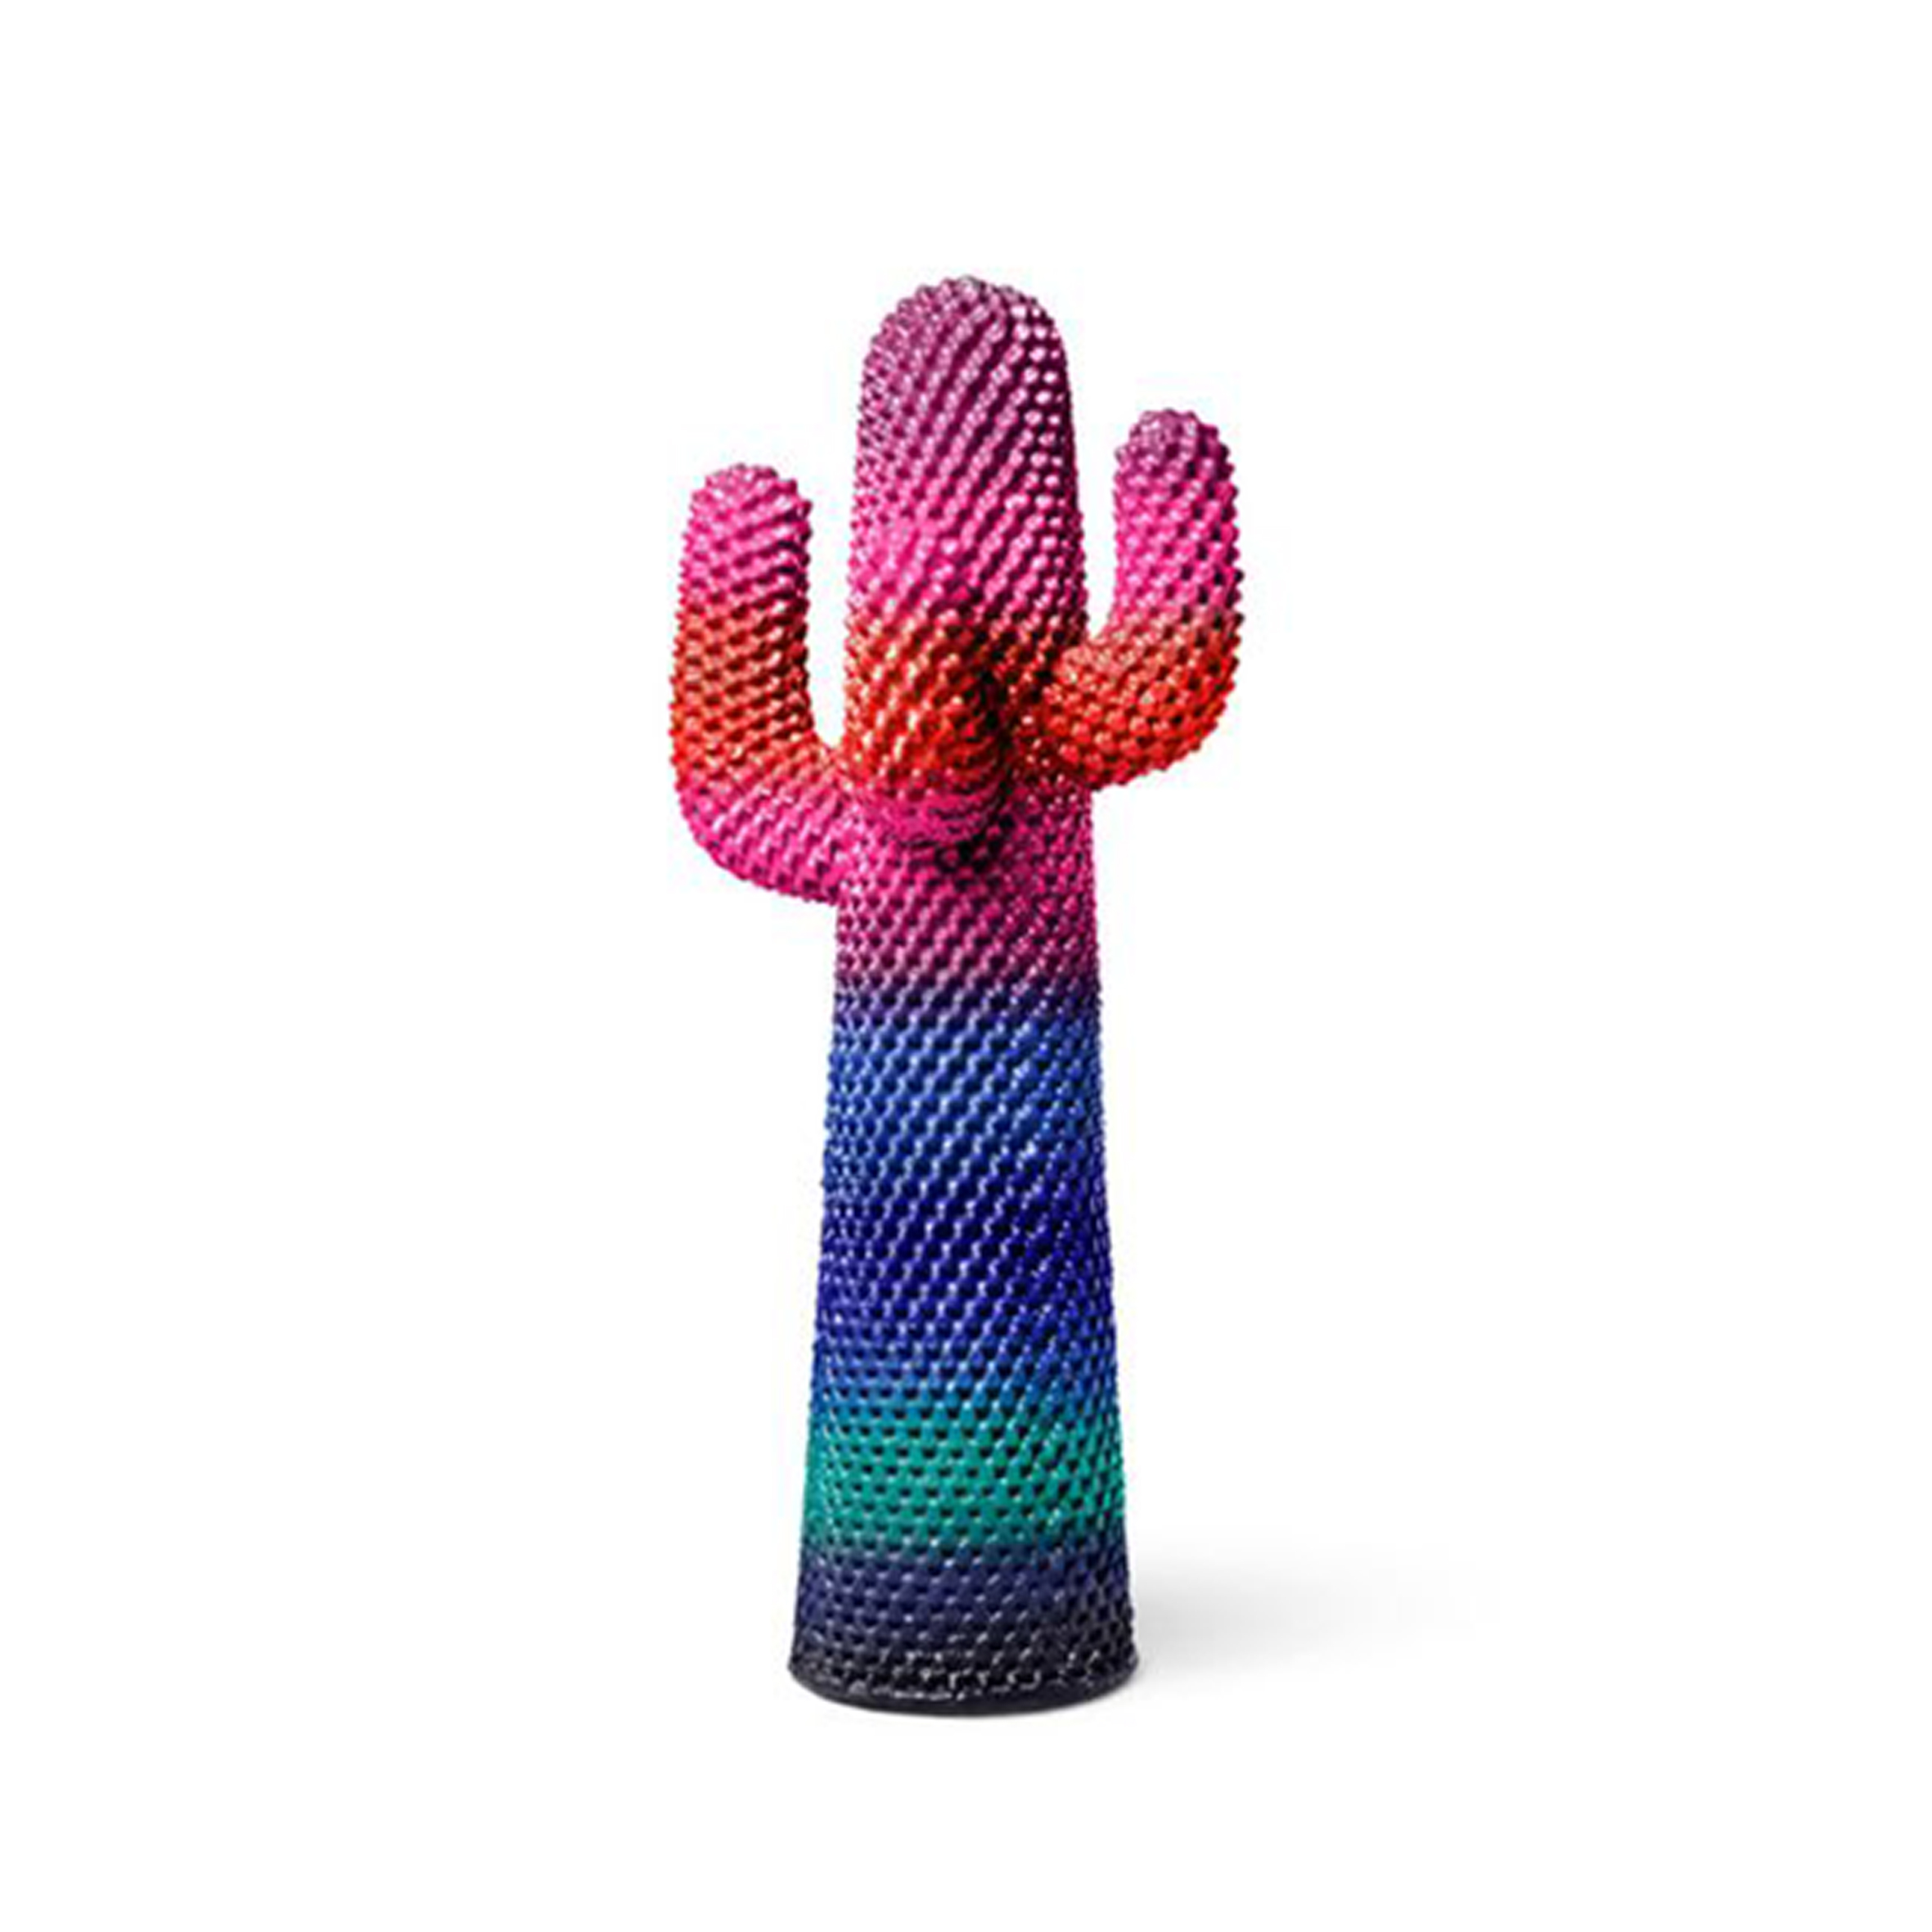 Psychedelic Cactus by Gufram & Paul Smith, limited edition